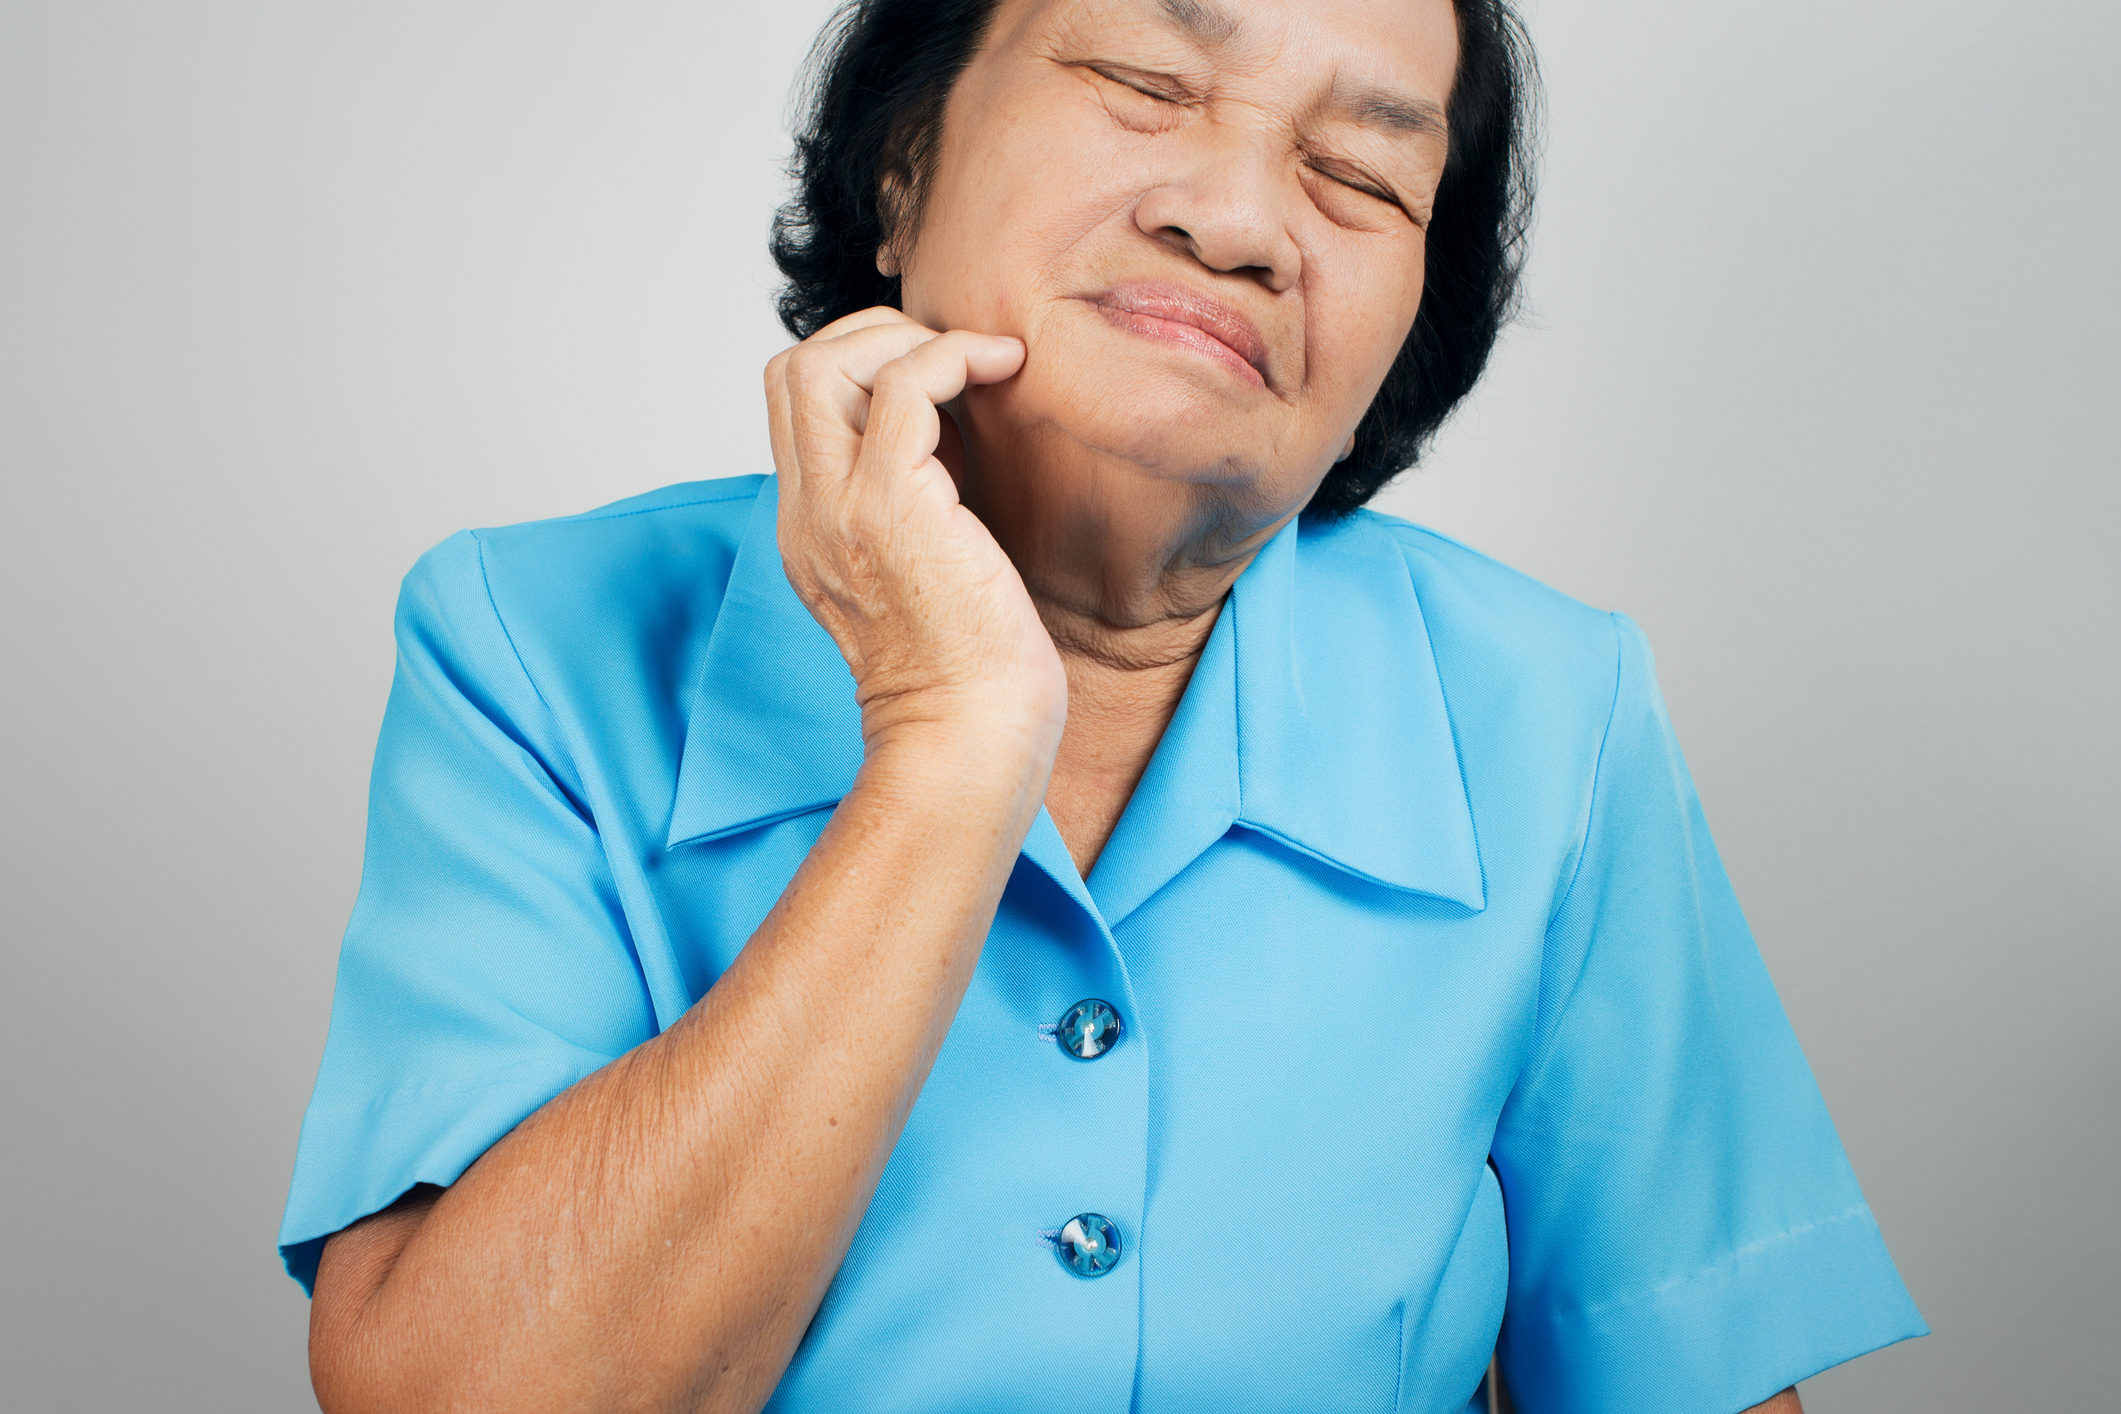 Elderly woman pinching her cheek, eyes closed, with a pained or uncomfortable expression